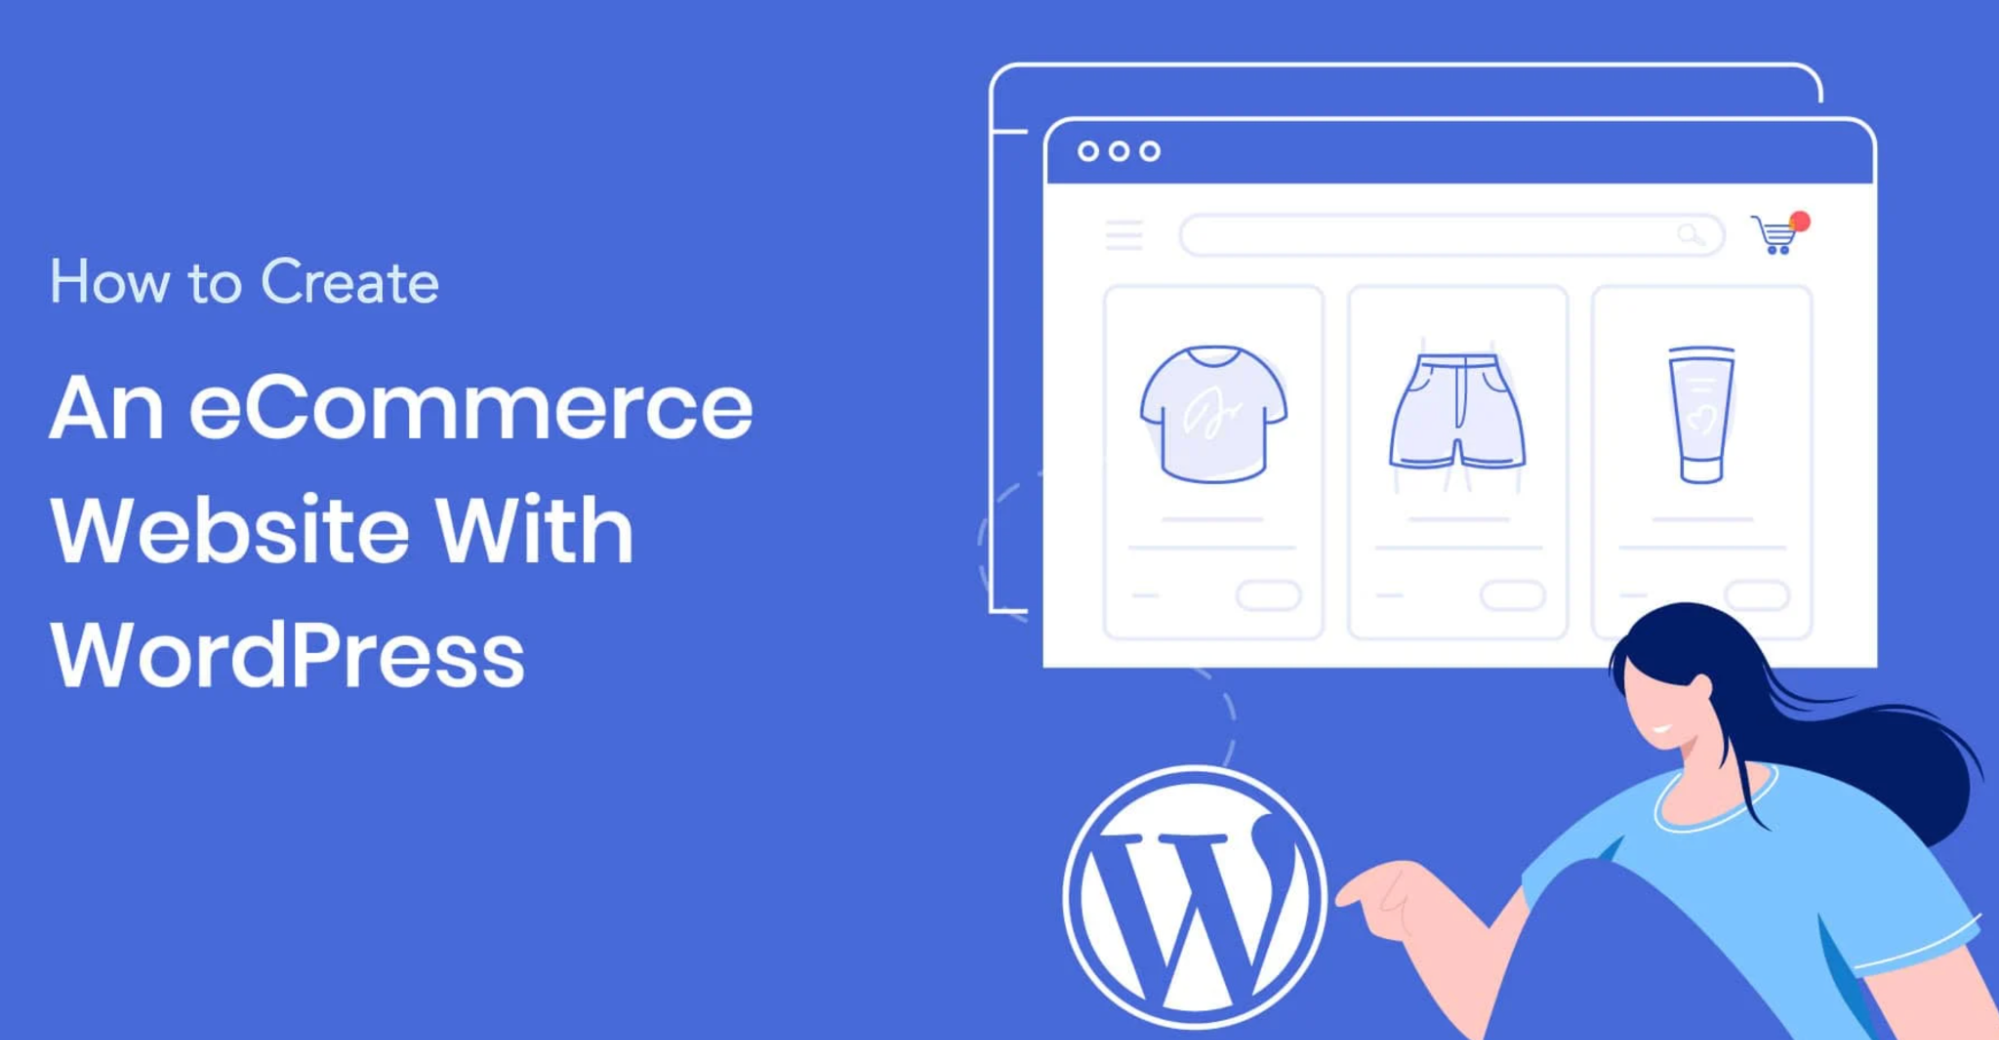 How to Make an Ecommerce Website with WordPress in 2022